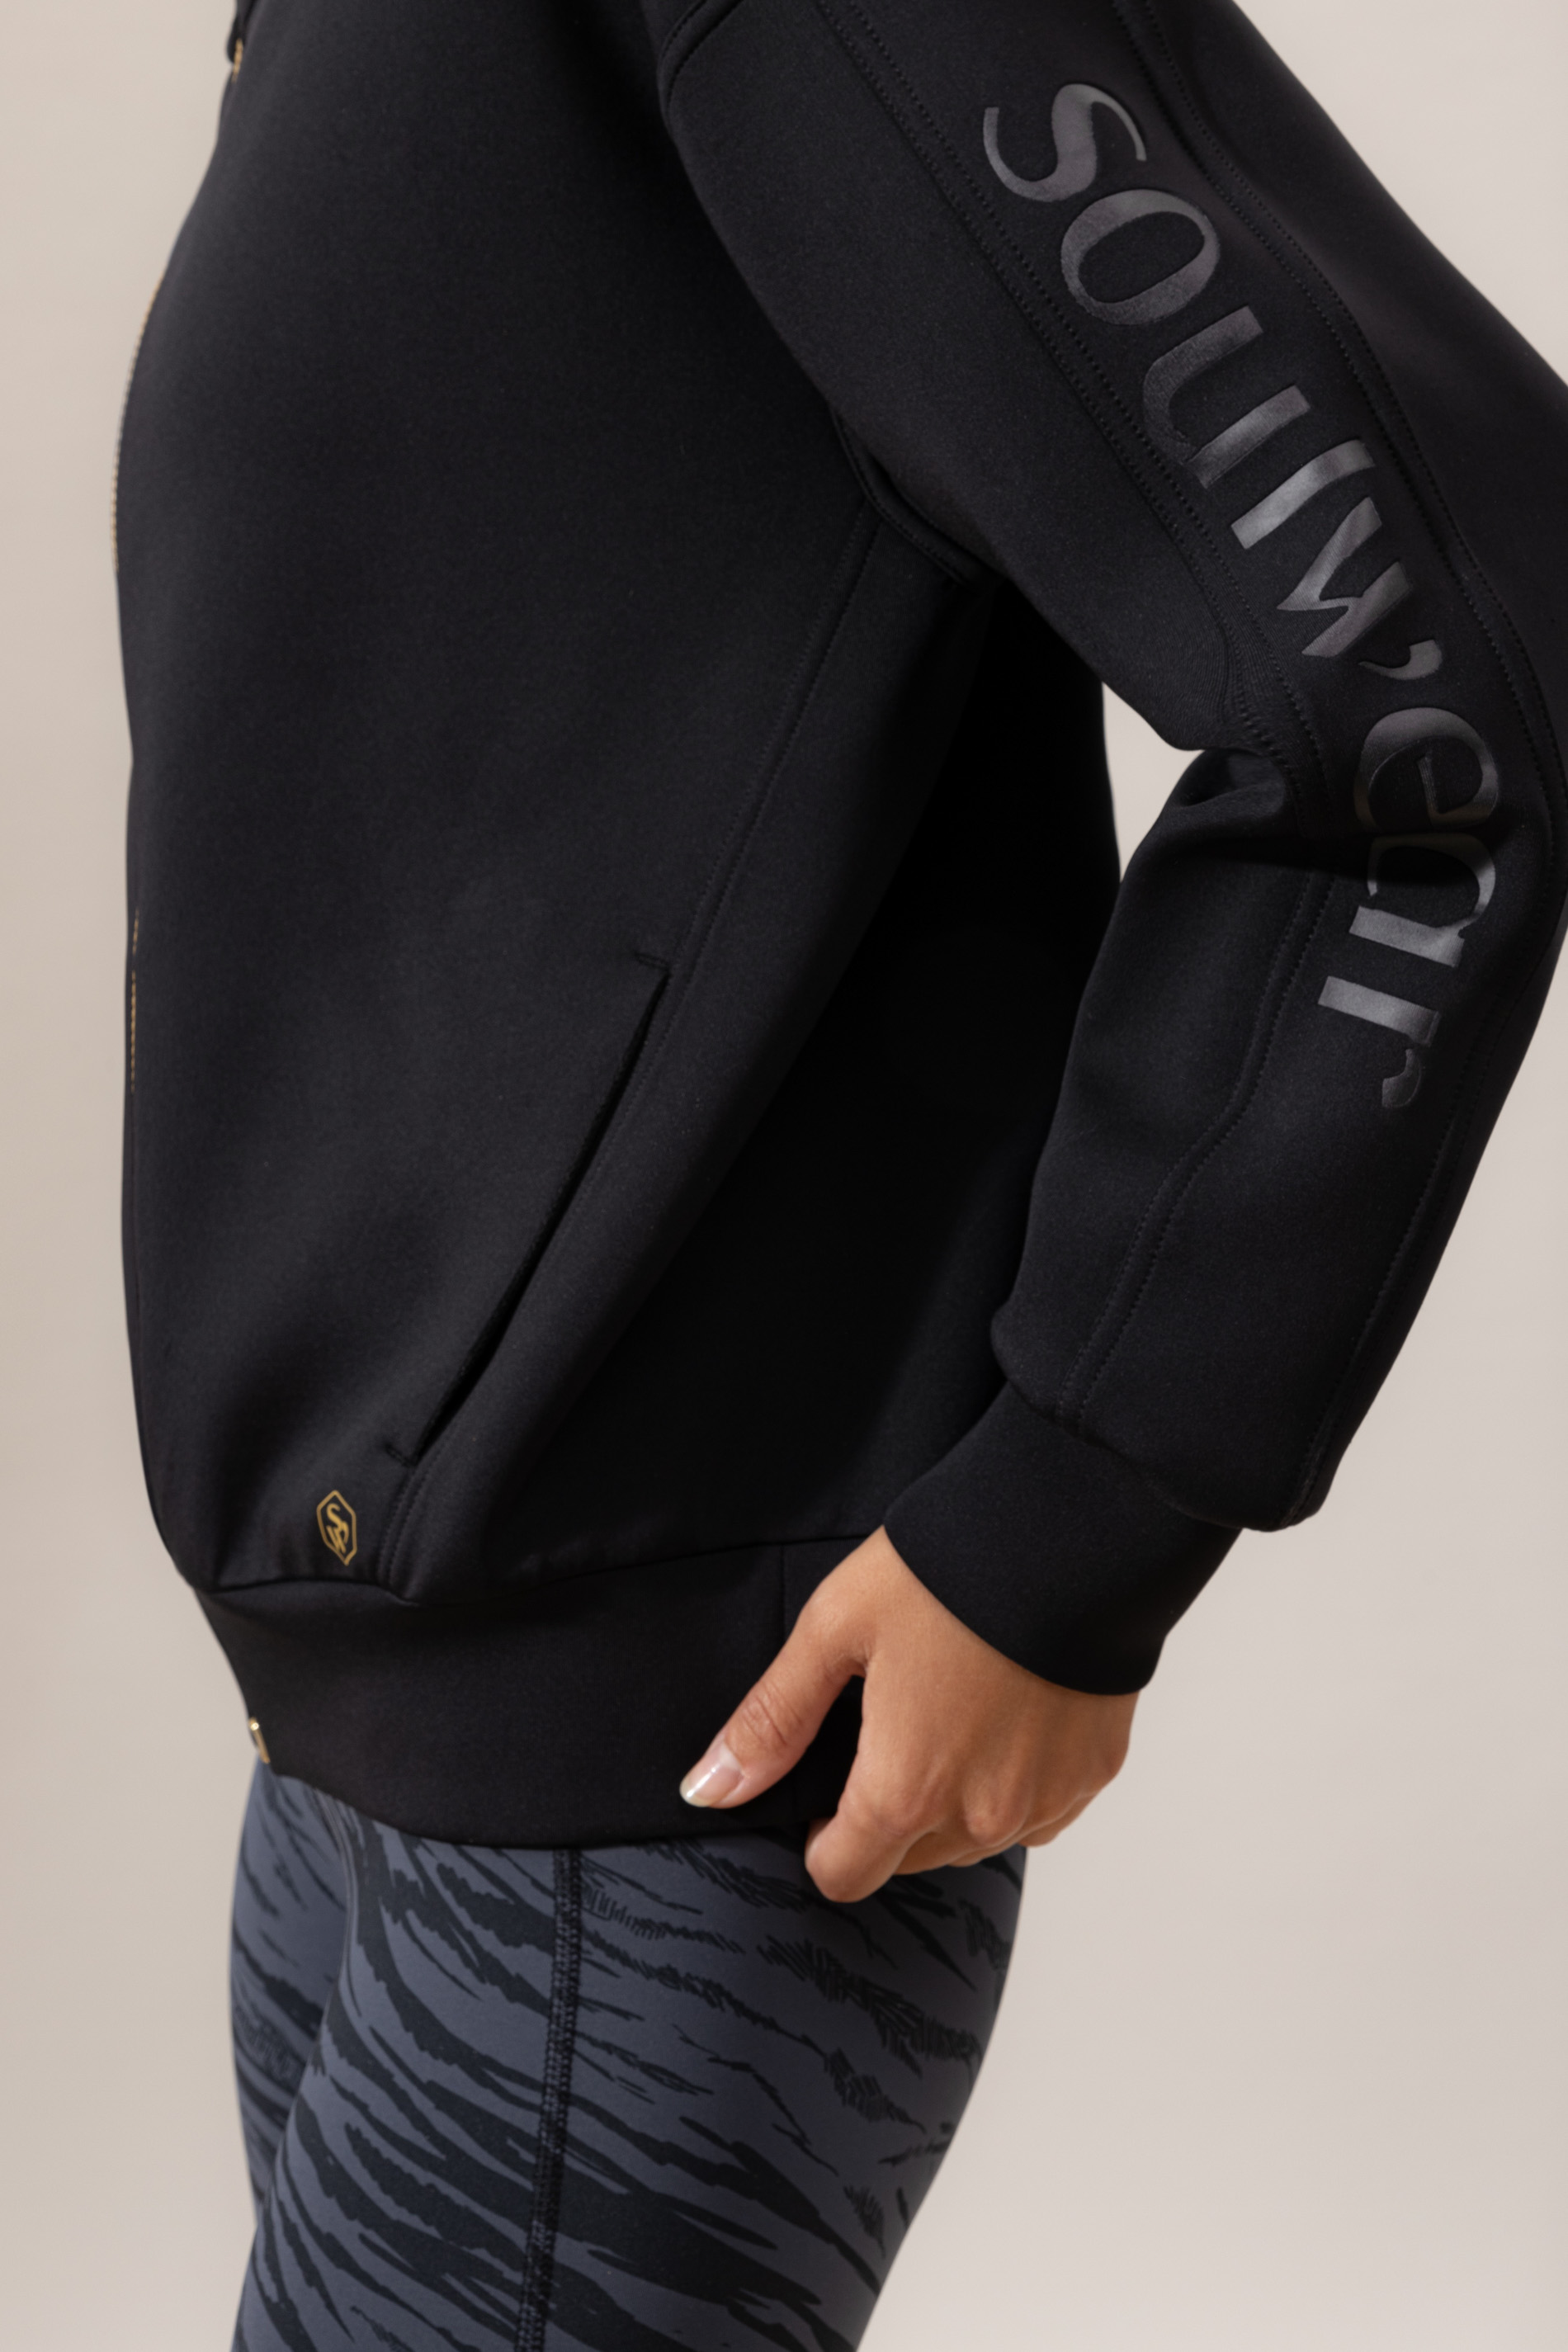 Hooded jacket Space Black Serie Balanced Detail View 02 | mey®